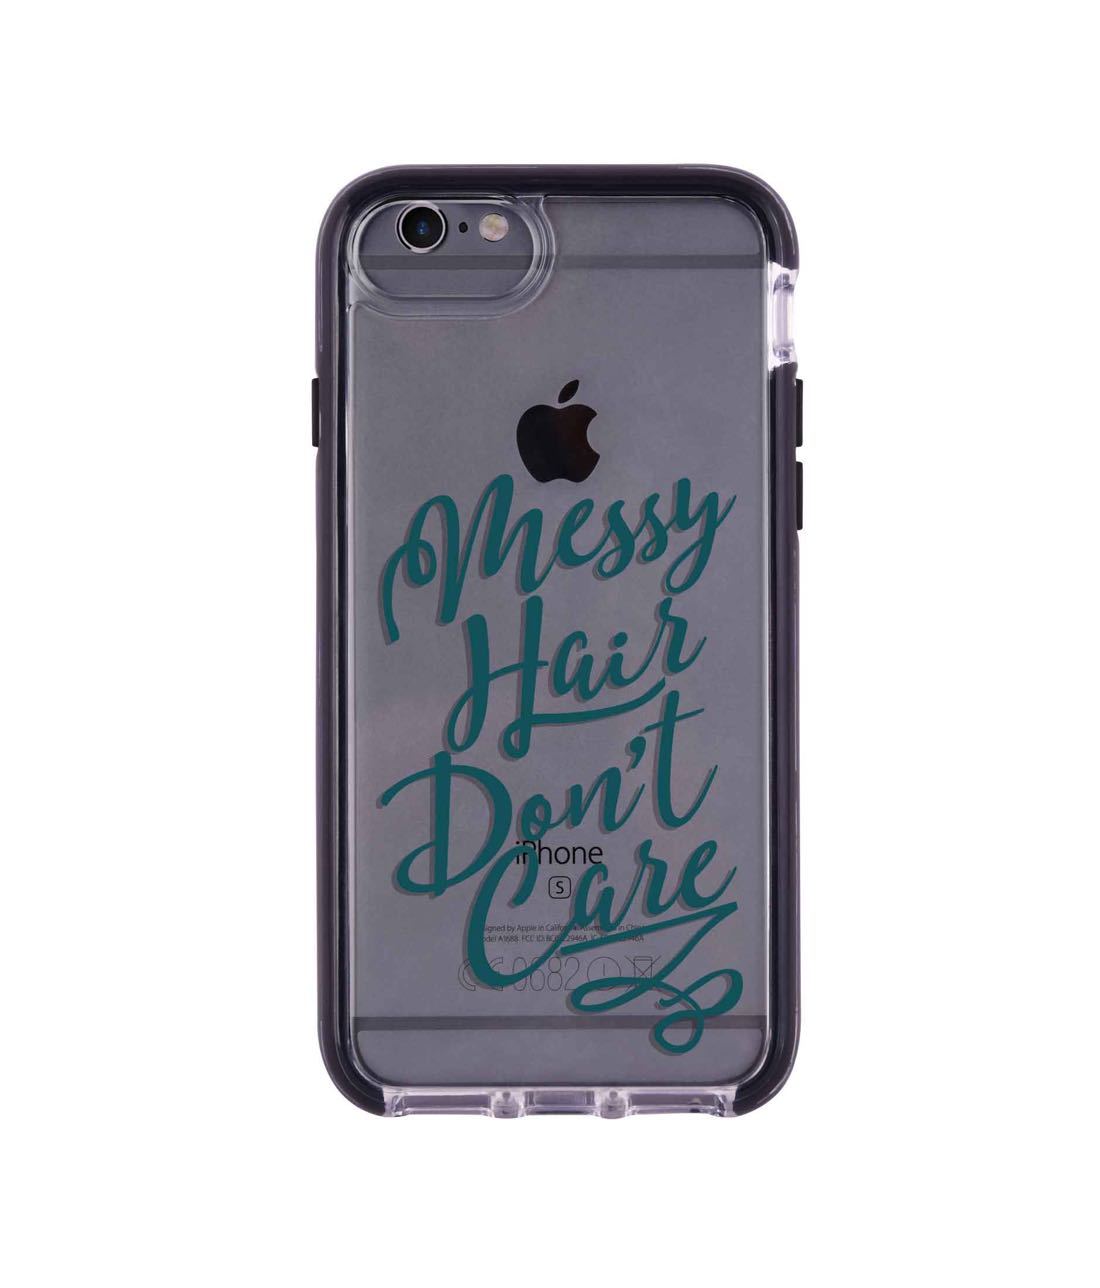 Messy Hair Dont Care - Extreme Phone Case for iPhone 6 Plus